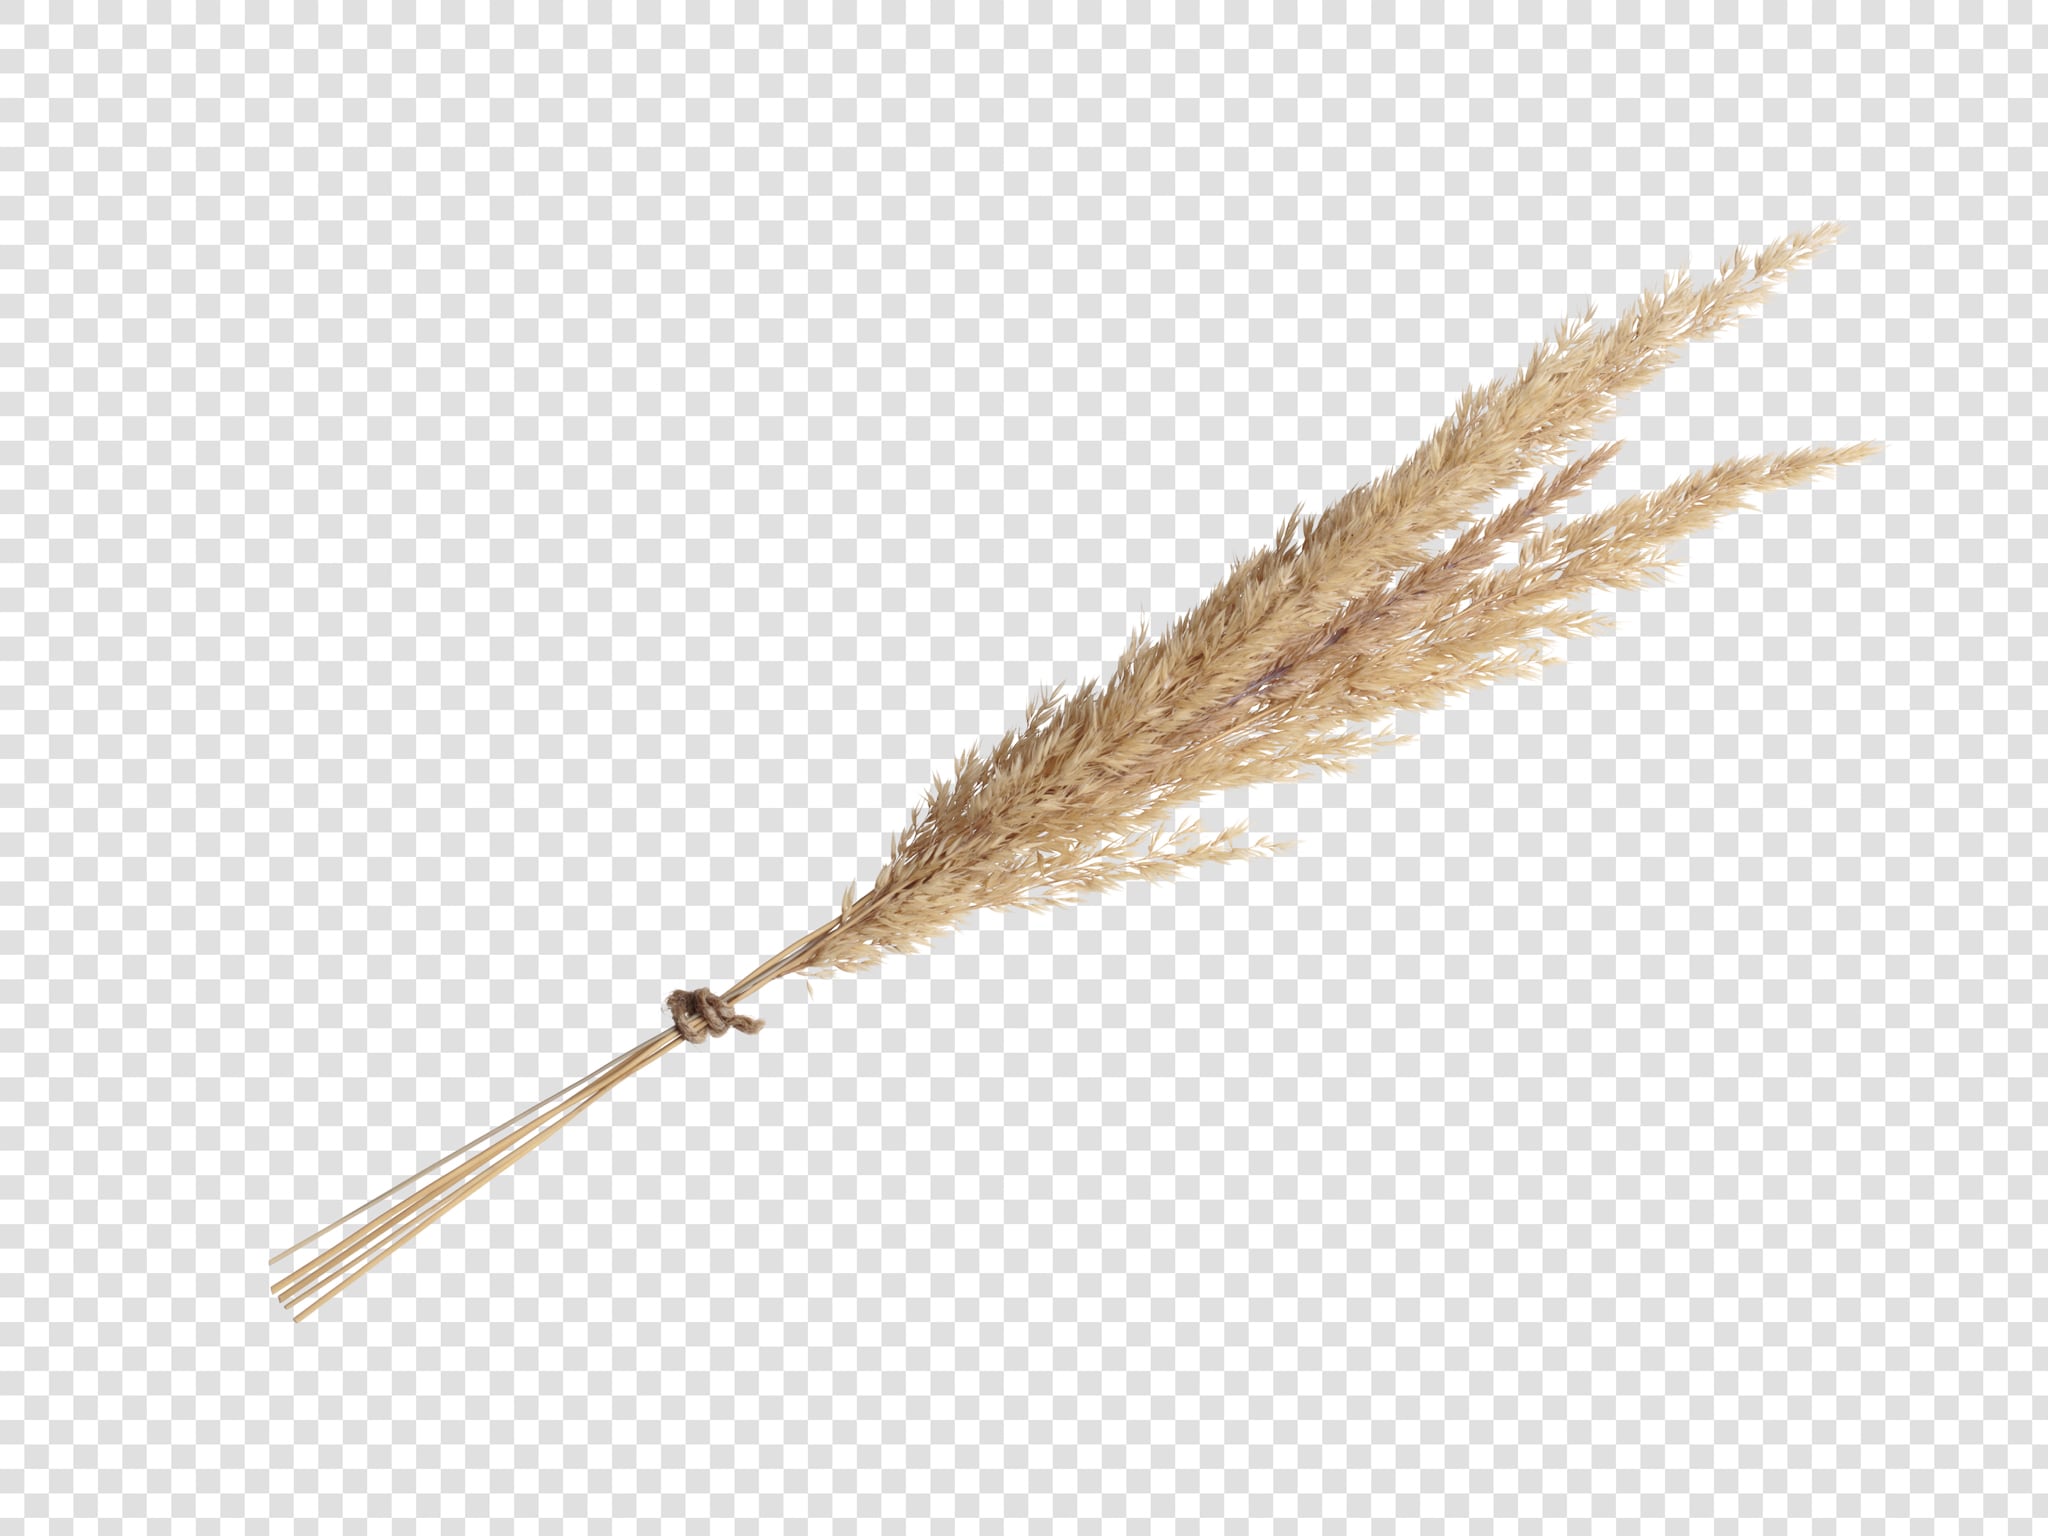 Dried flower image with transparent background